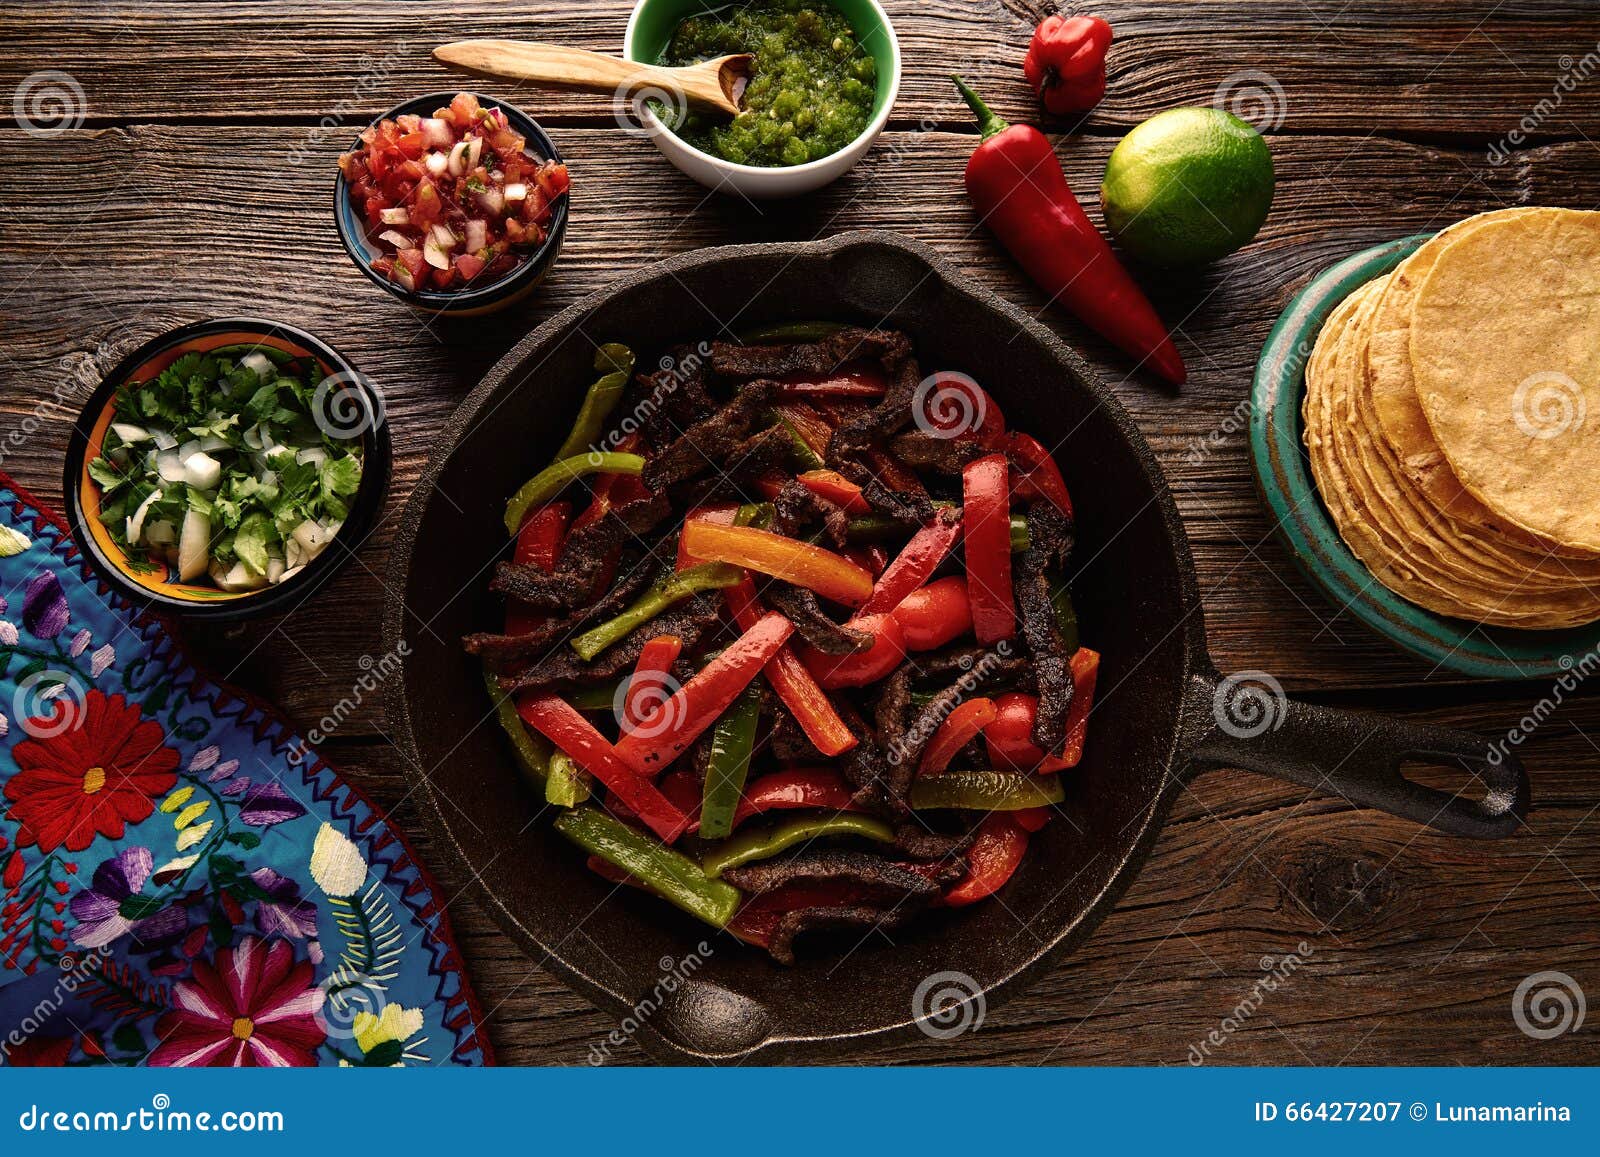 beef fajitas in a pan with sauces mexican food